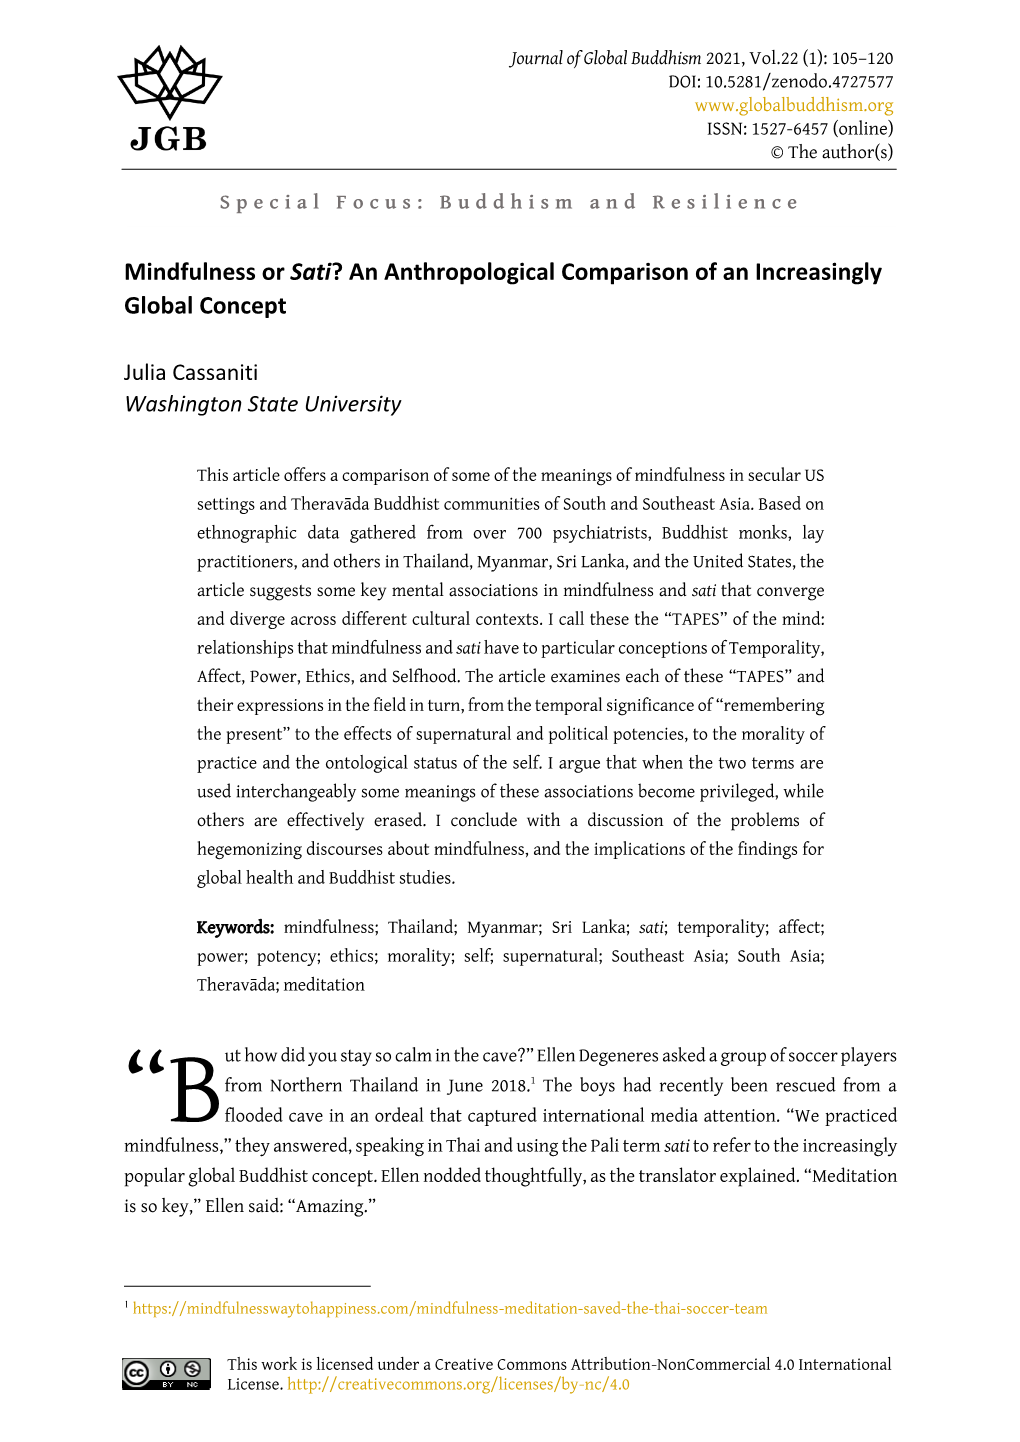 Mindfulness Or Sati? an Anthropological Comparison of an Increasingly Global Concept